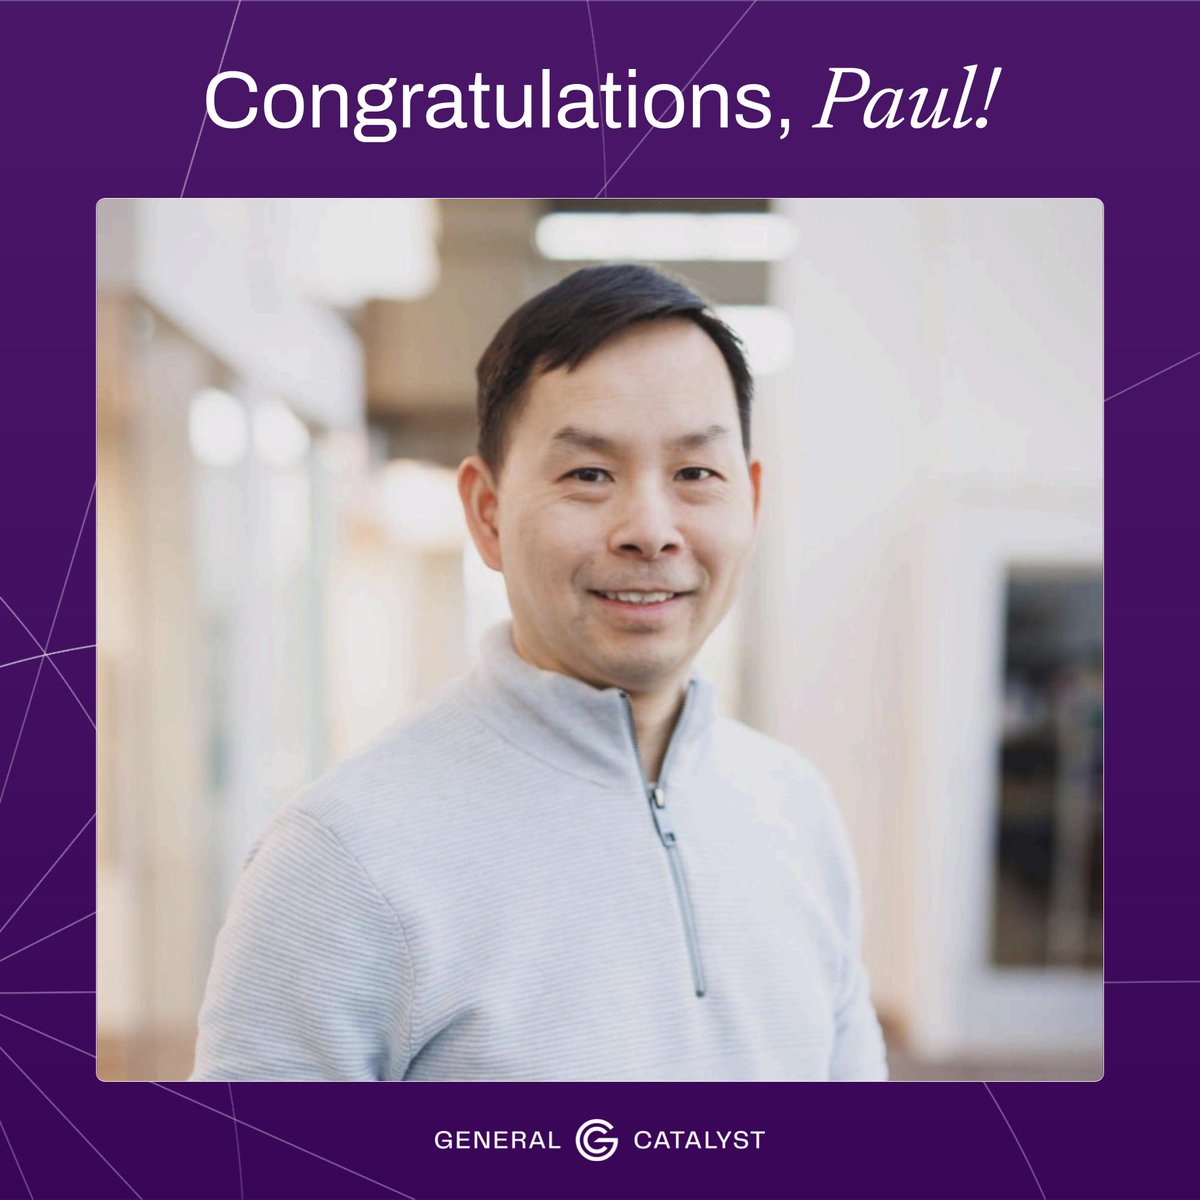 Congrats to GC's Paul Kwan for being named to @BusinessInsider's Top Defense Tech VCs list! We're inspired by your boundless passion for global resilience. 🌍 Revisit our modern defense & intelligence pillar → generalcatalyst.com/perspectives/b… Full profiles → businessinsider.com/top-defense-te…